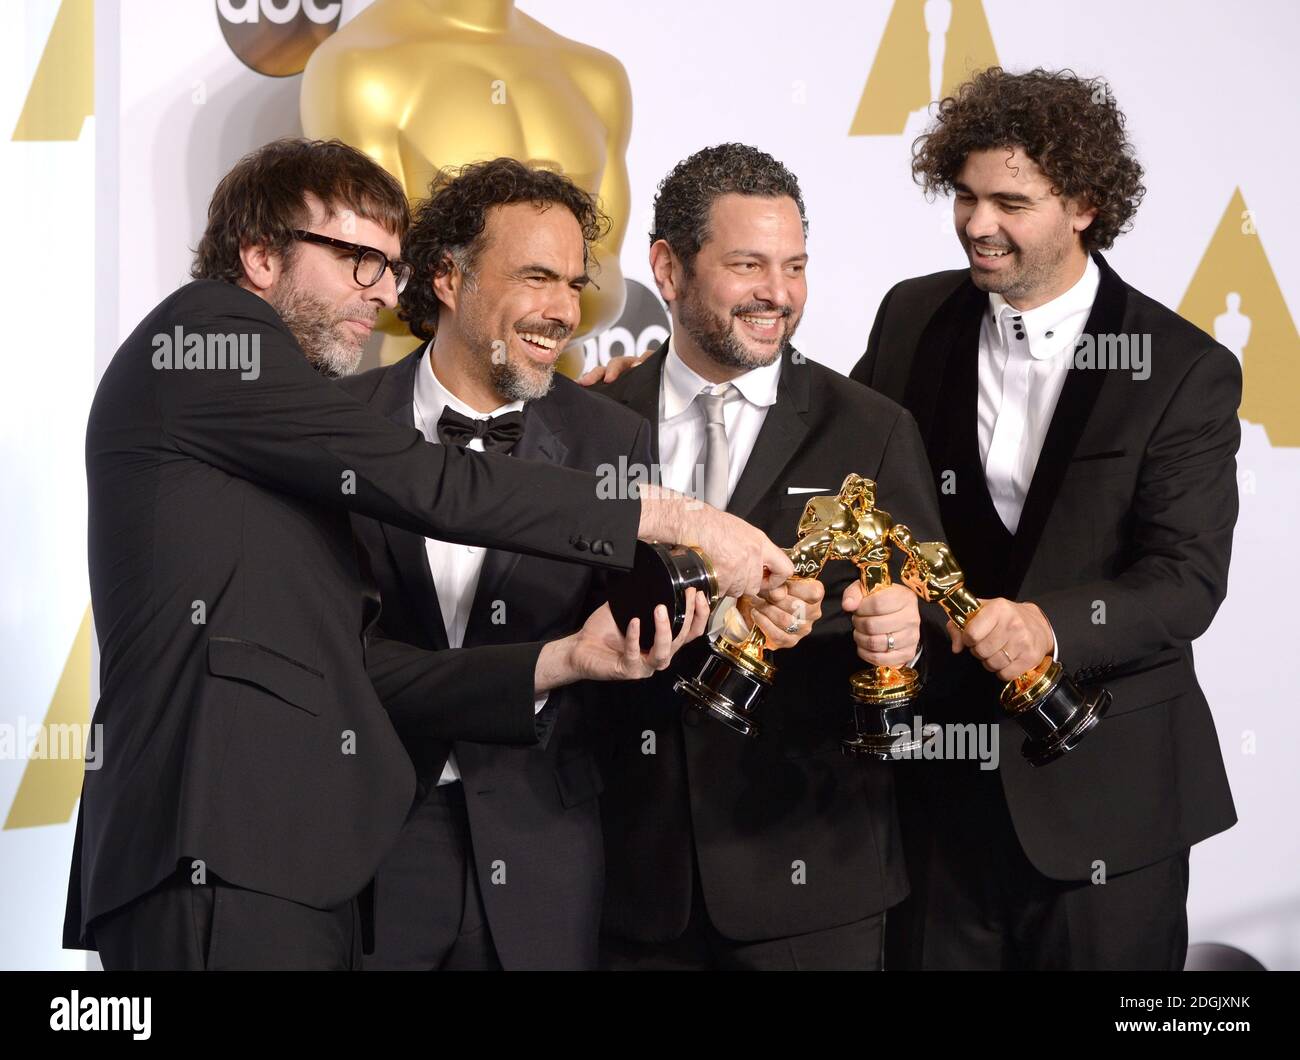 (left to right) Producer James W. Skotchdopole, actor Sean Penn, producer/director Alejandro G. Inarritu, winner of Best Original Screenplay, Best Director, and Best Motion Picture, for 'Birdman' and producer John Lesher, in the press room of the 87th Academy Awards held at the Dolby Theatre in Hollywood, Los Angeles, CA, USA, February 22, 2015. Stock Photo